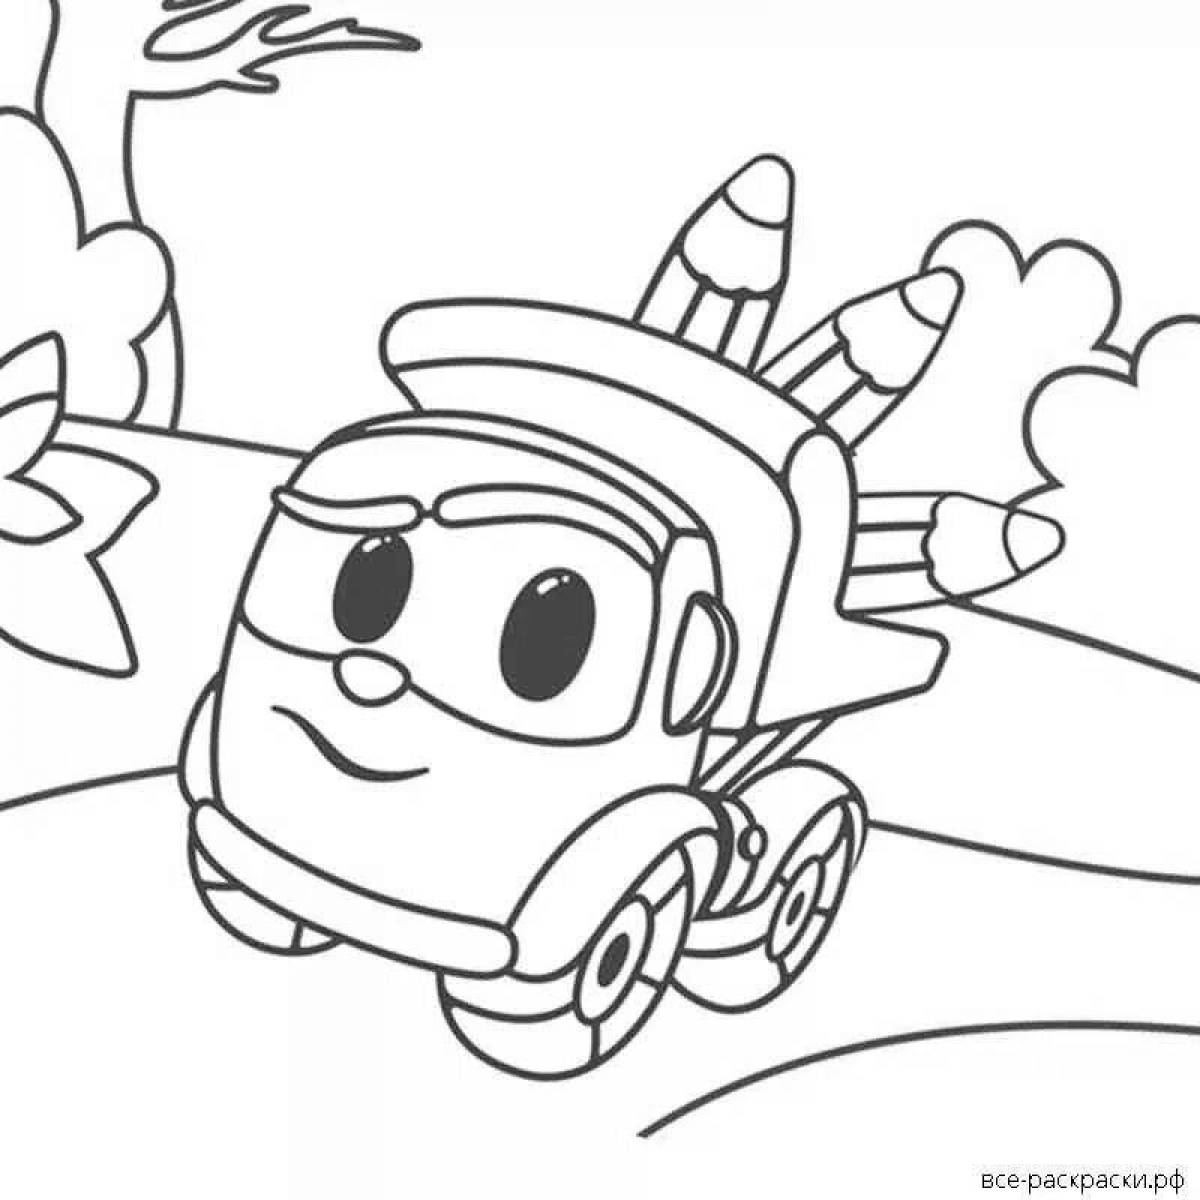 Majestic lev truck coloring page